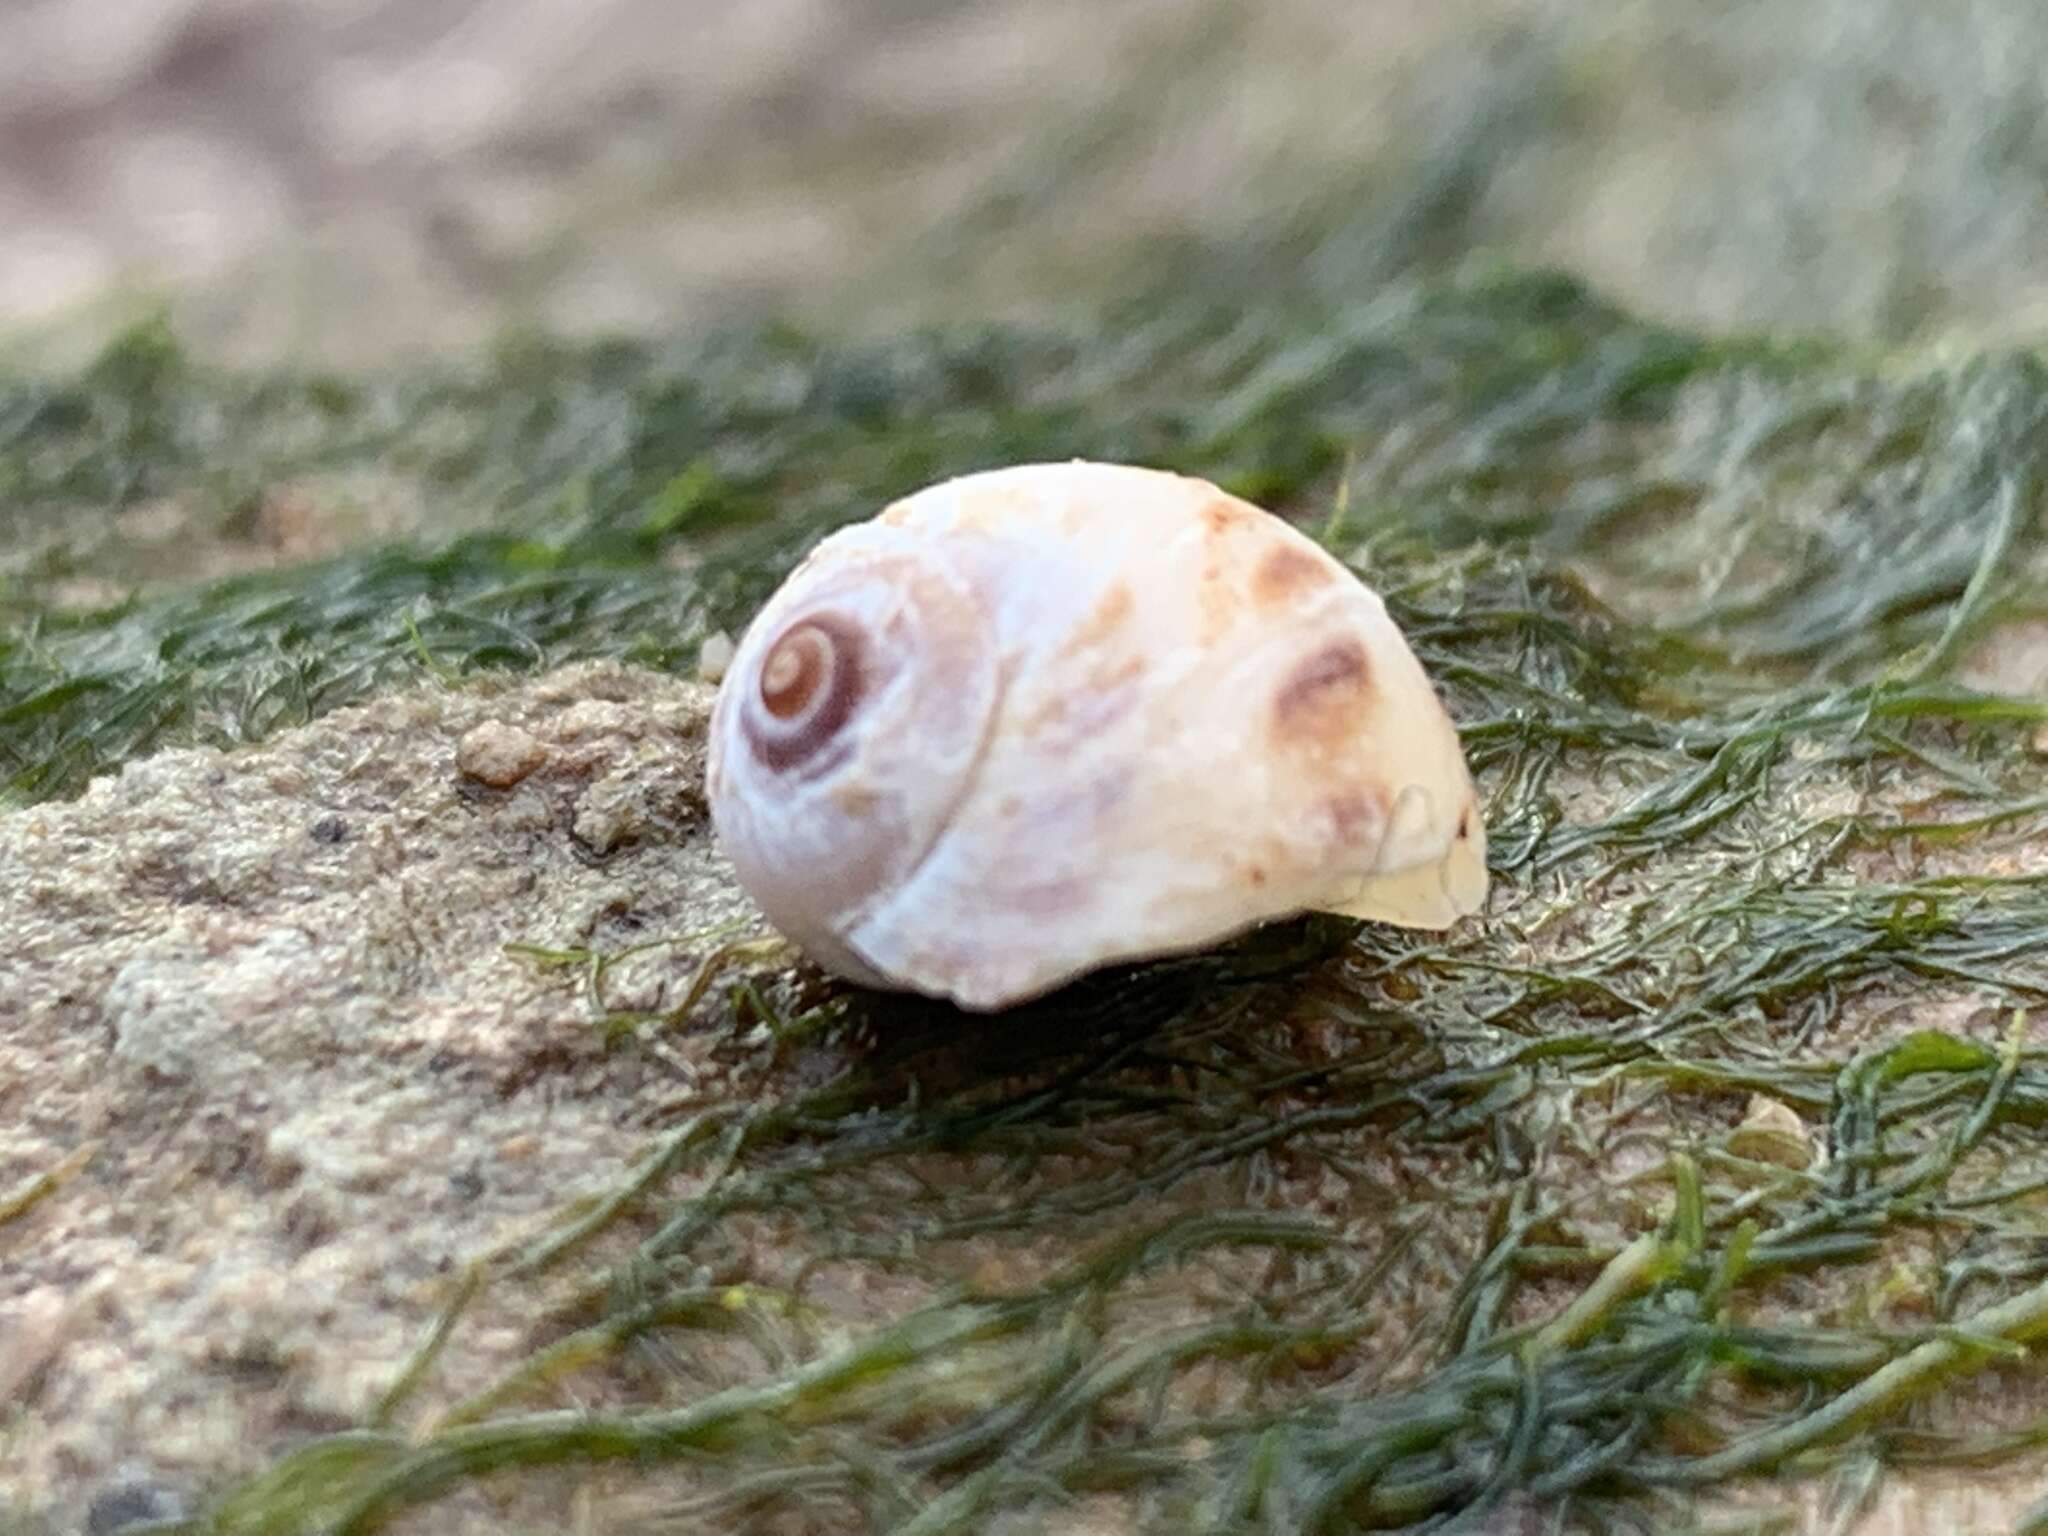 Image of spotted moonsnail